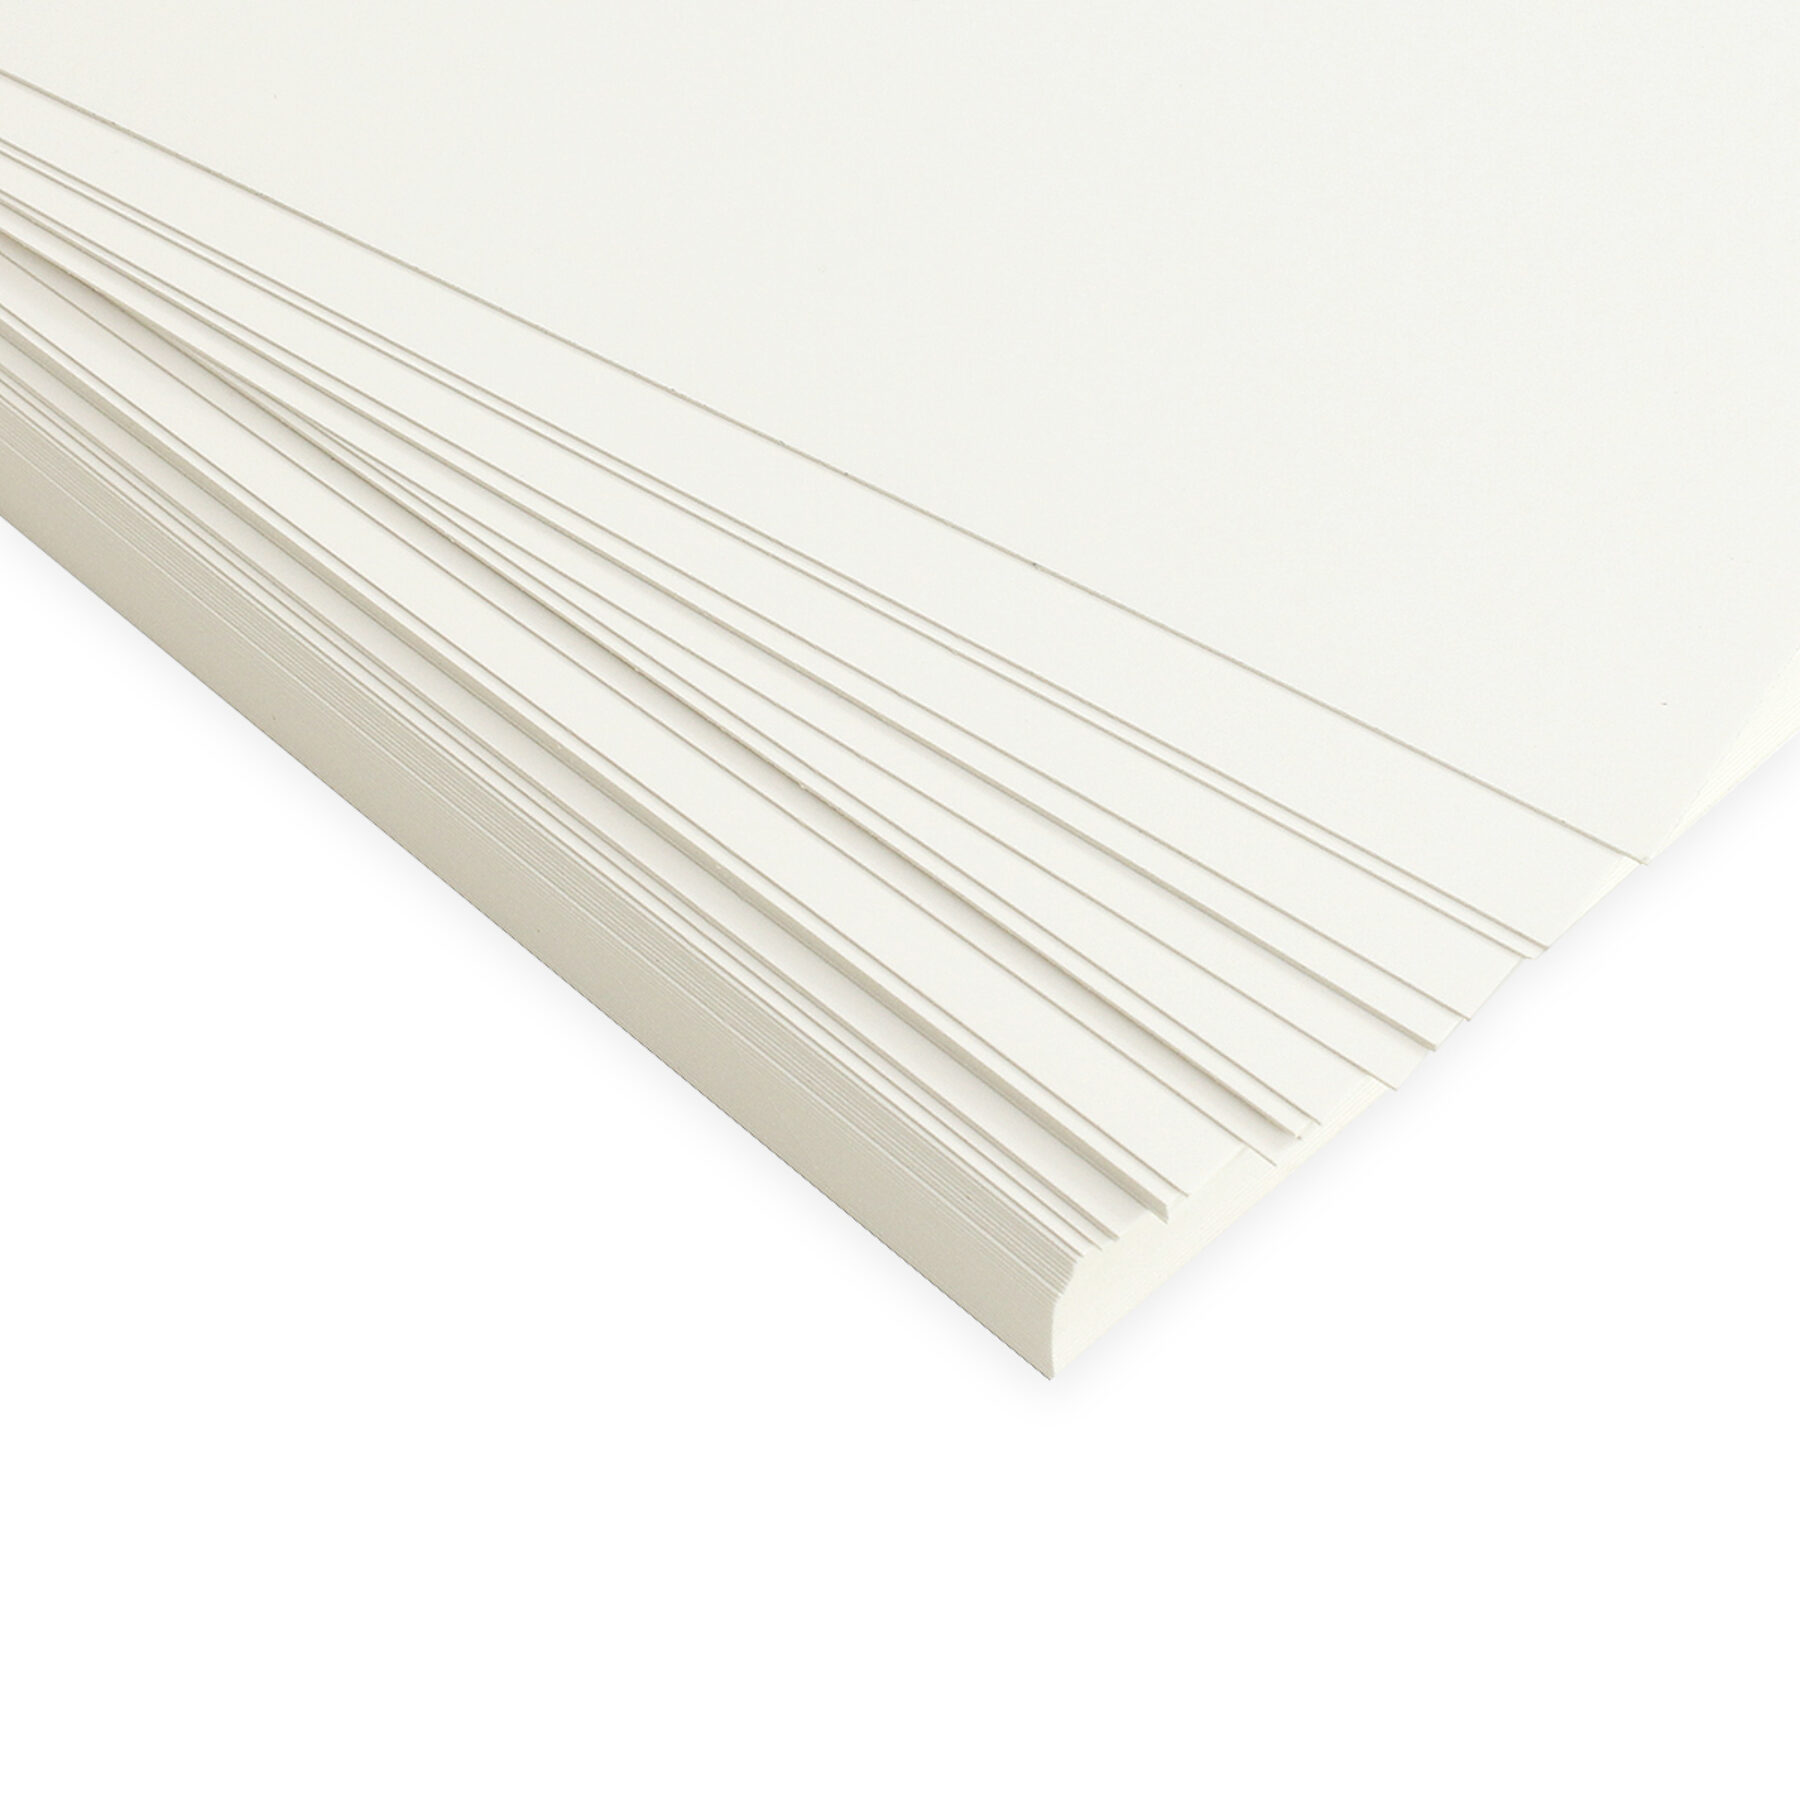 A7 White Card (50 Sheets)